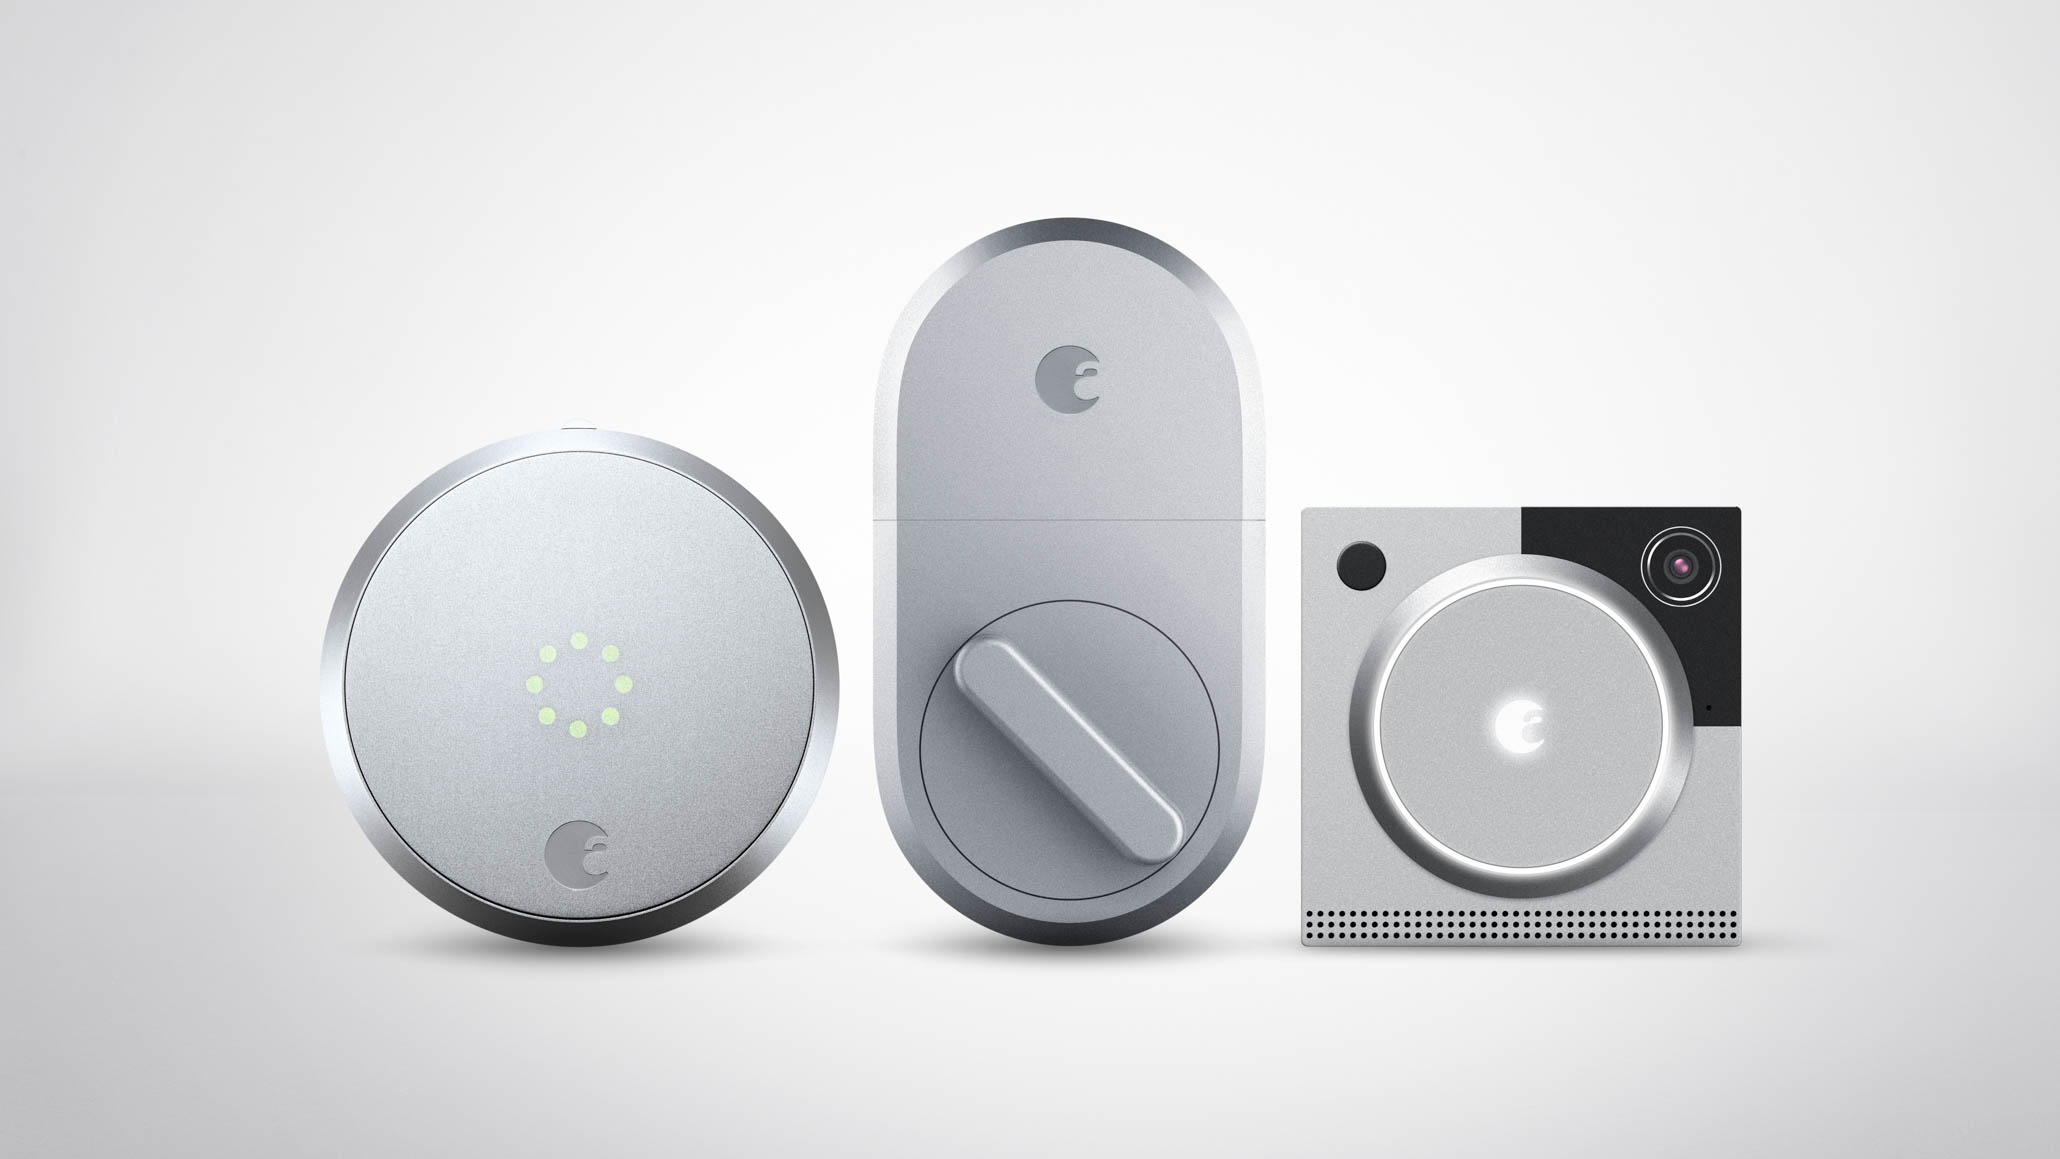 Smart locks from August (left and center) are designed to replace the interior portion of a standard deadbolt. On right, an August smart doorbell. Image: August Home.